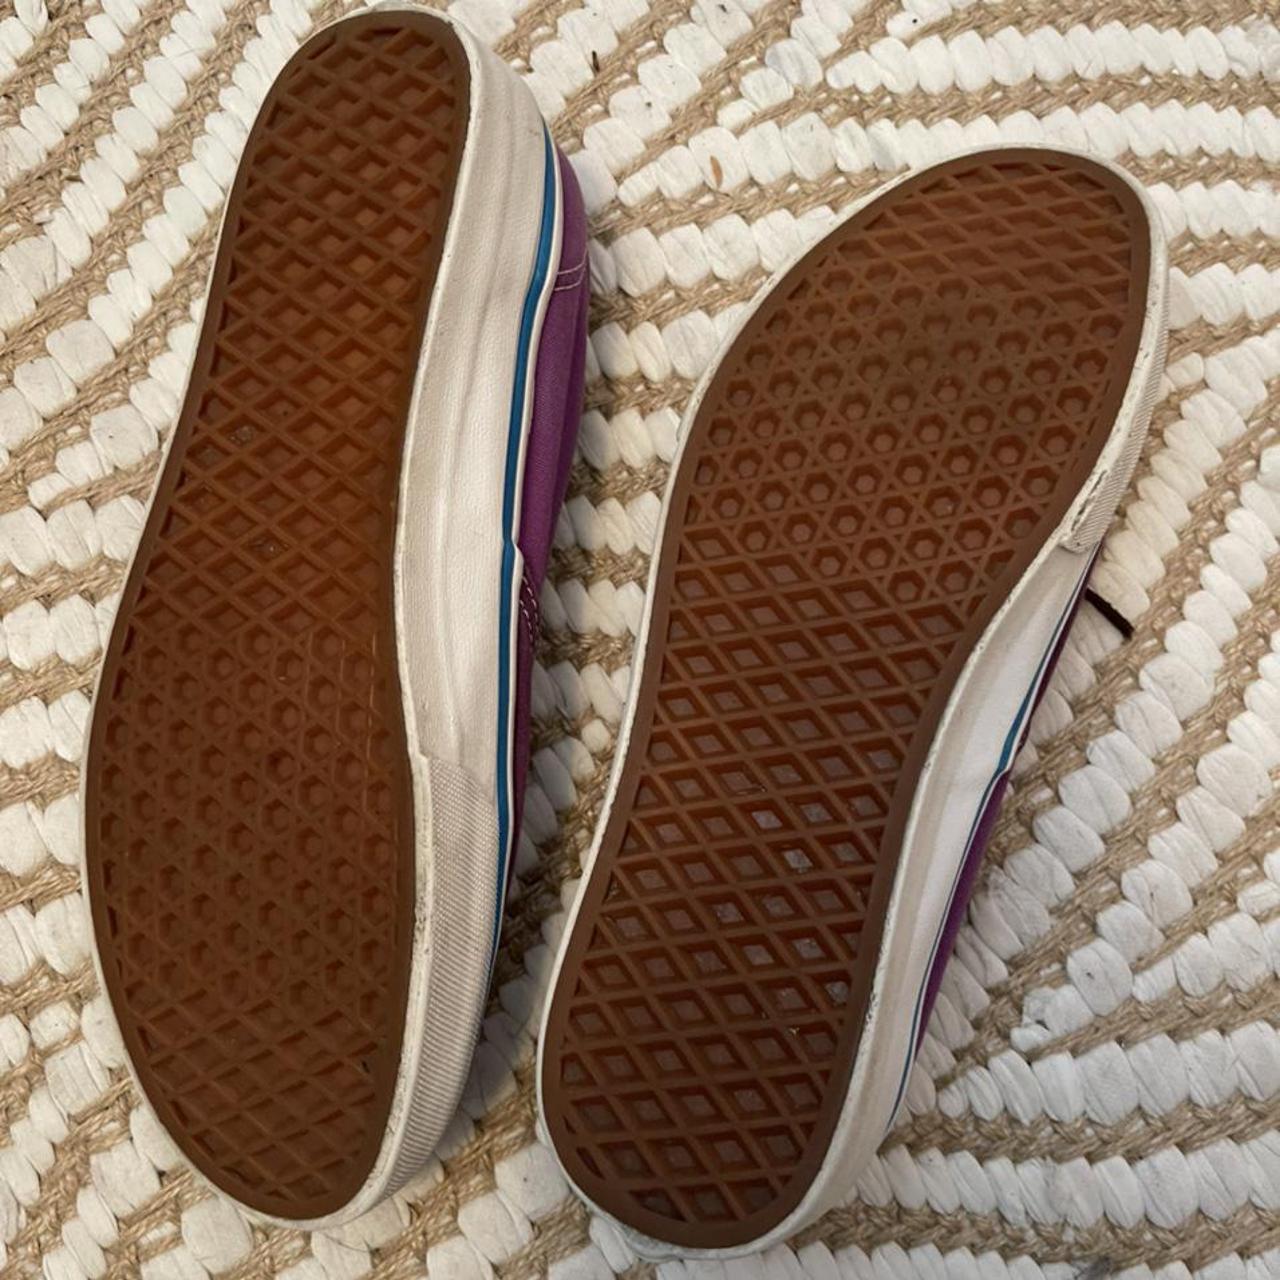 Product Image 2 - retro pair of purple and